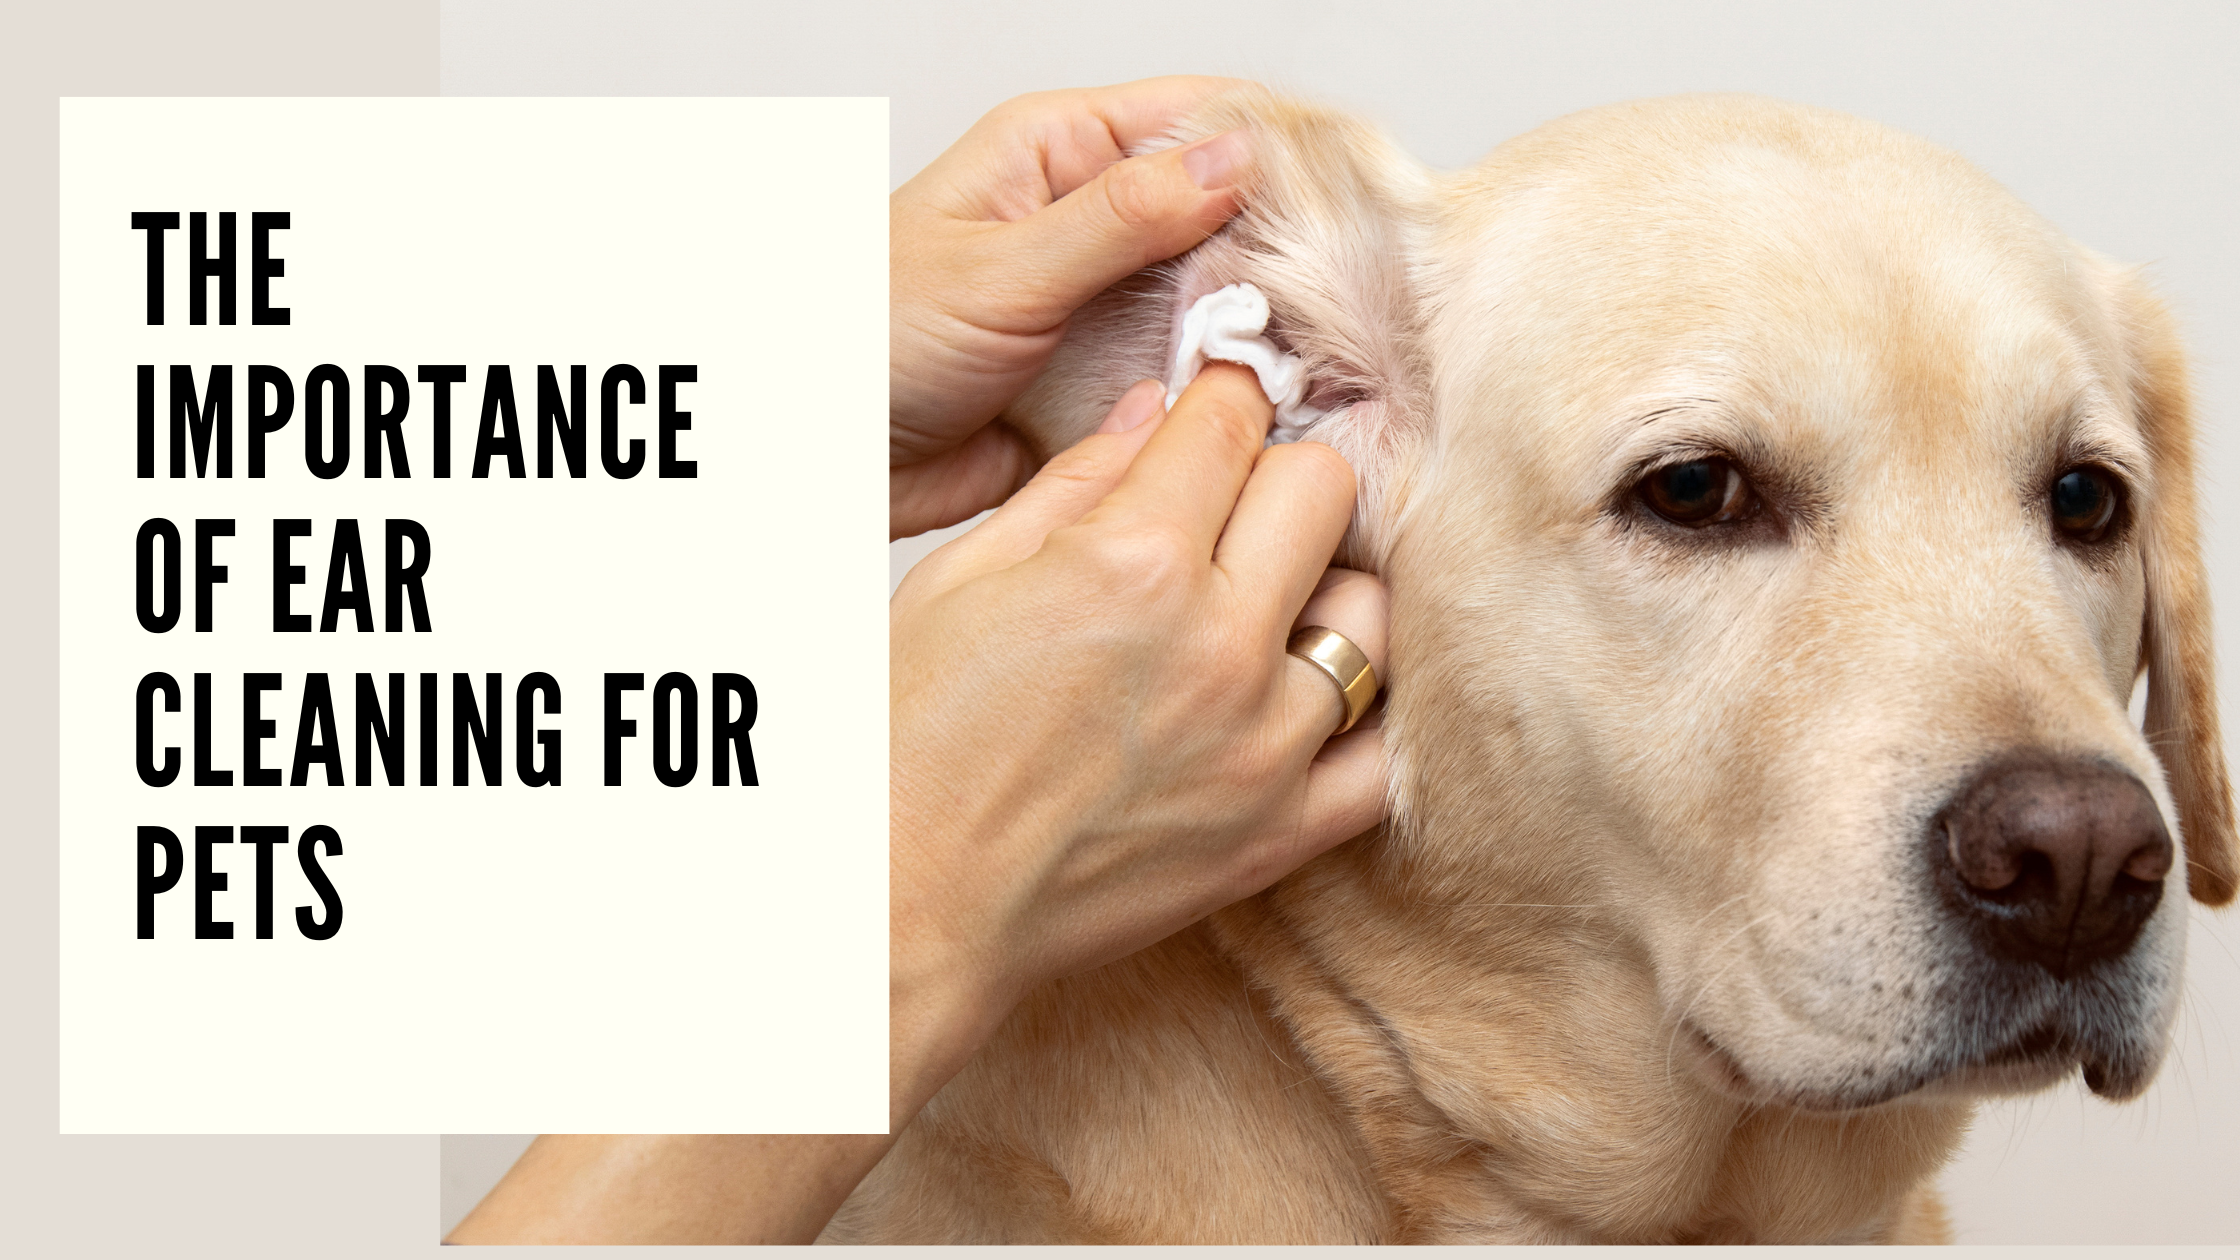 The Importance of Ear Cleaning for Pets